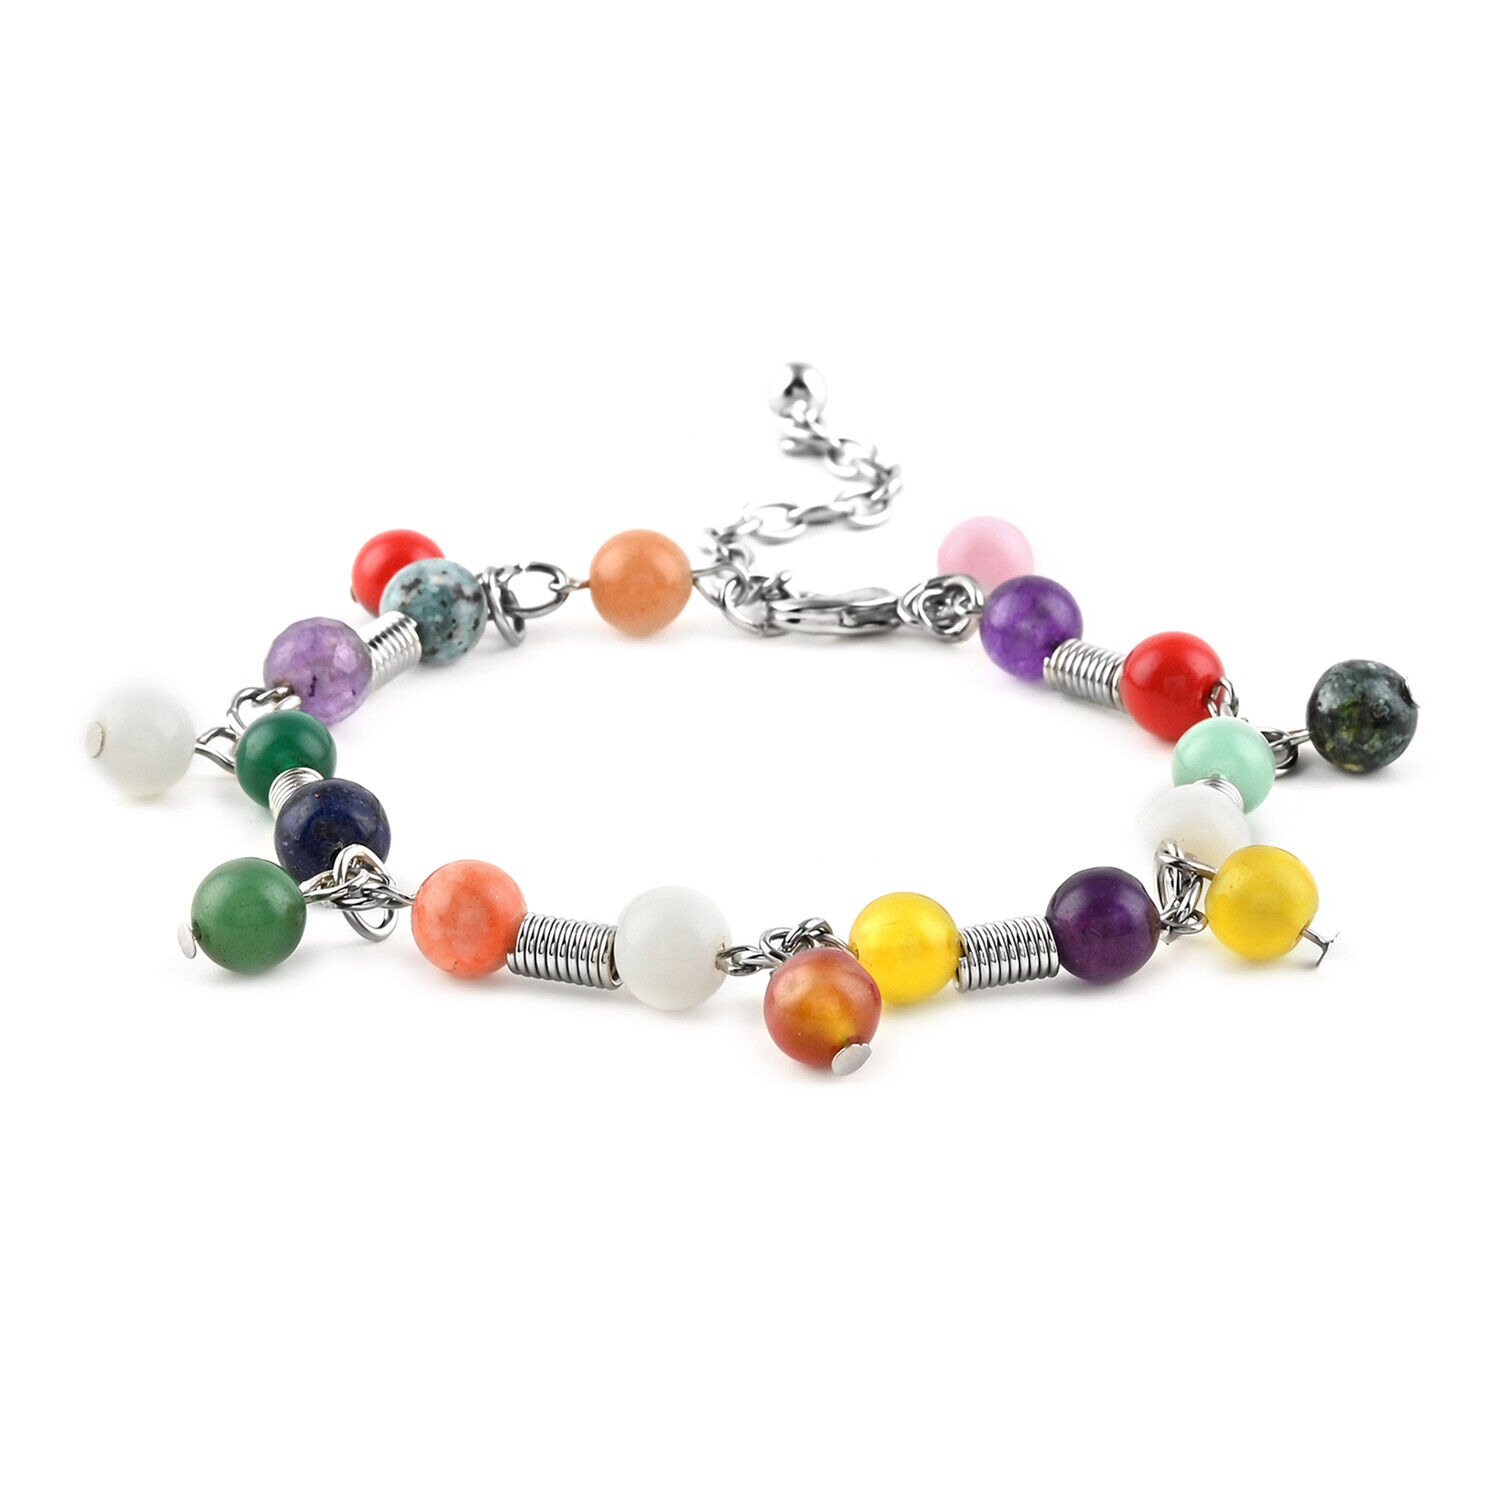 Check Out This Colorful Multi Genuine Gemstone Anklet 9-11"  Hypoallergenic